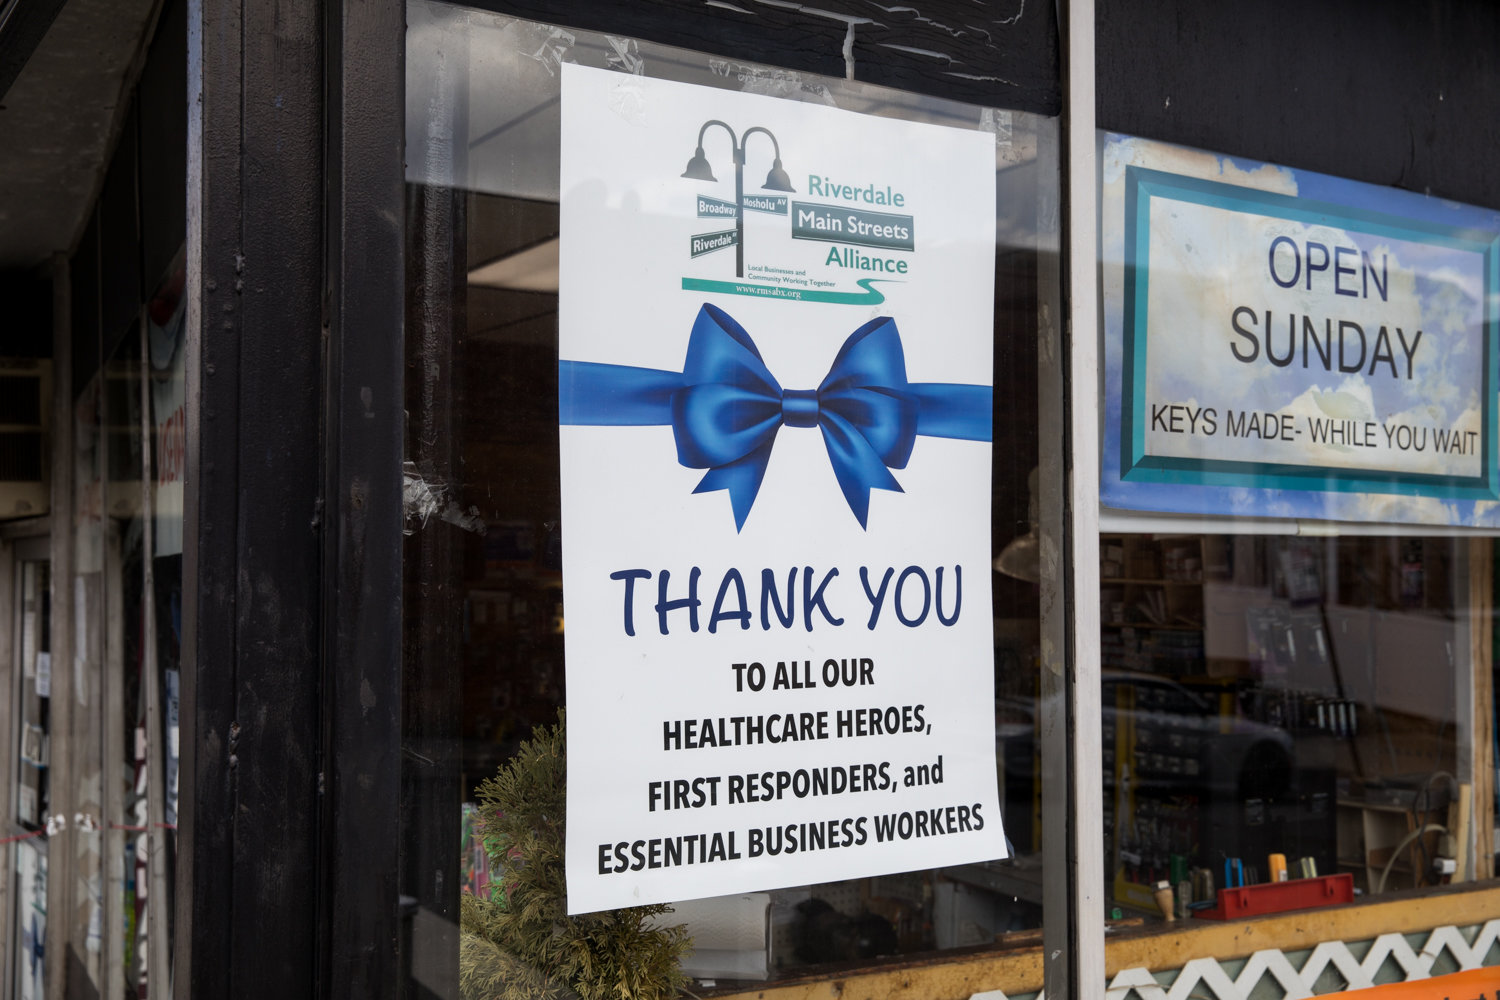 A sign thanking health care and essential workers is posted in the window of Cora Hardware on West 259th Street and Riverdale Avenue. The signs are a part of a thank you campaign by the Riverdale Main Streets Alliance.